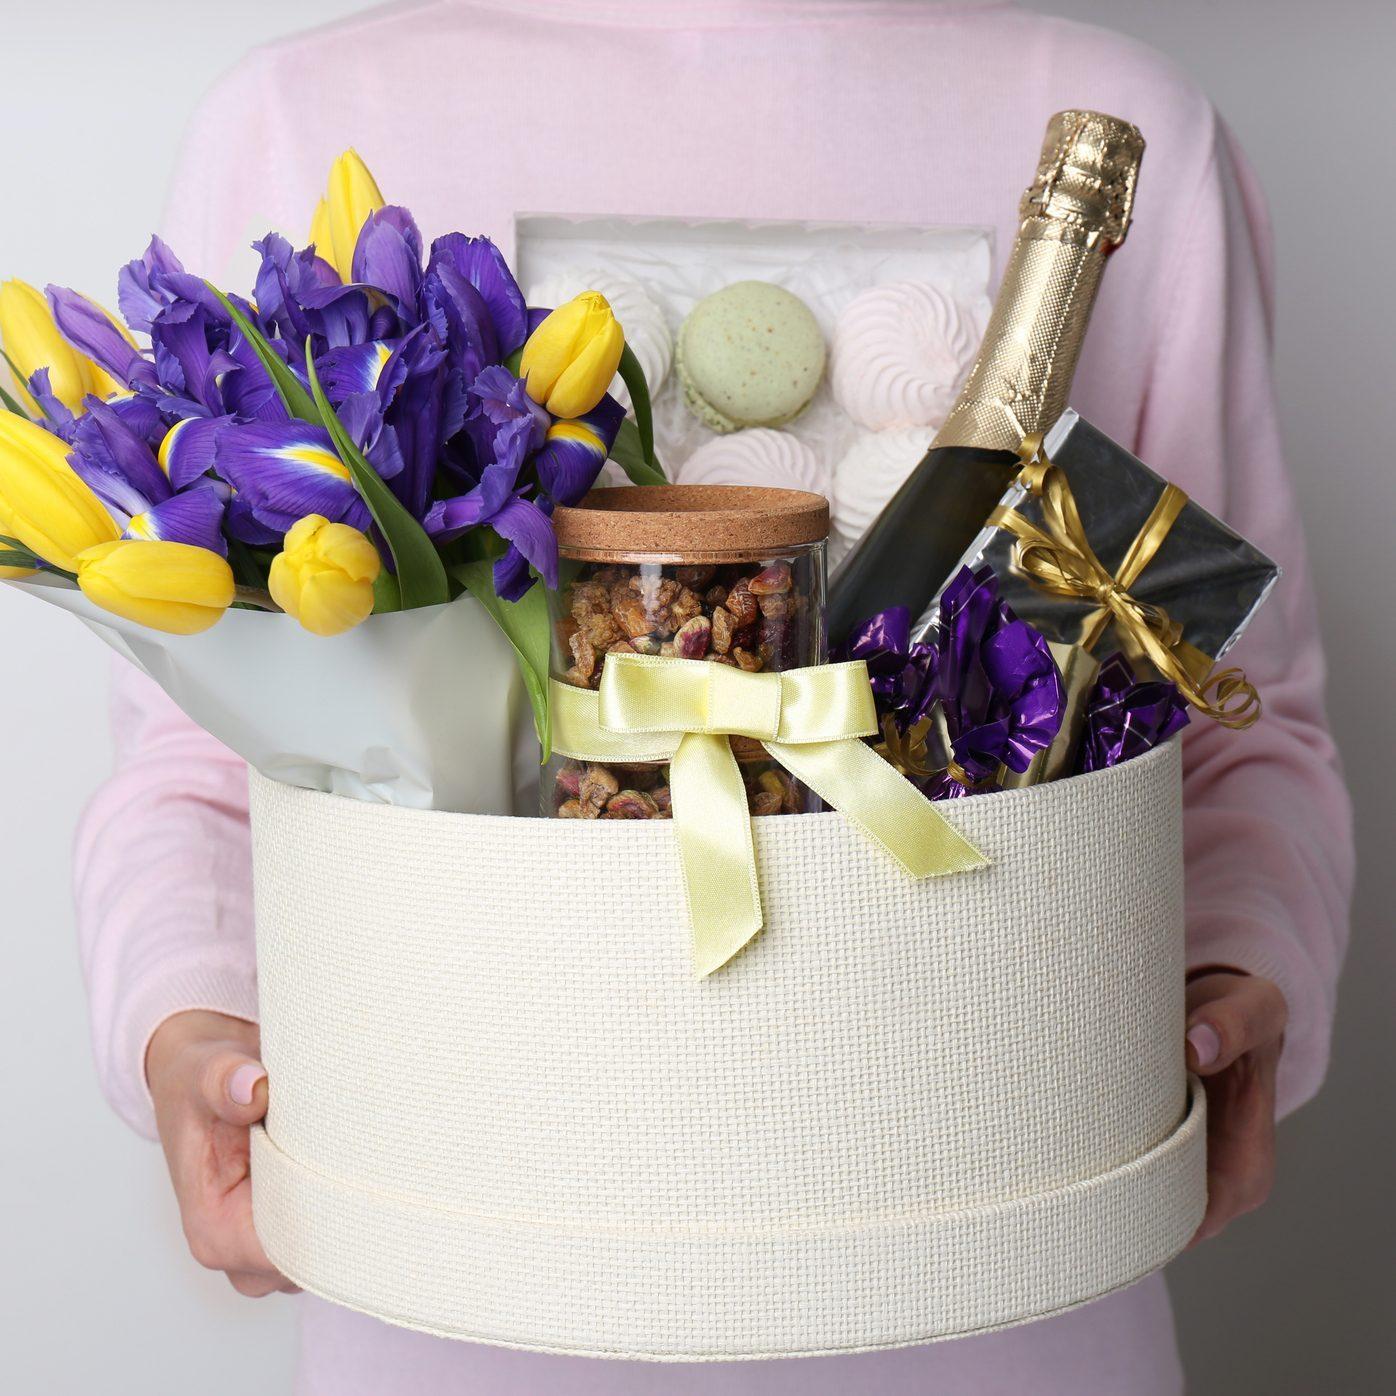 5 Best Easter Basket Ideas for Adults [2023]